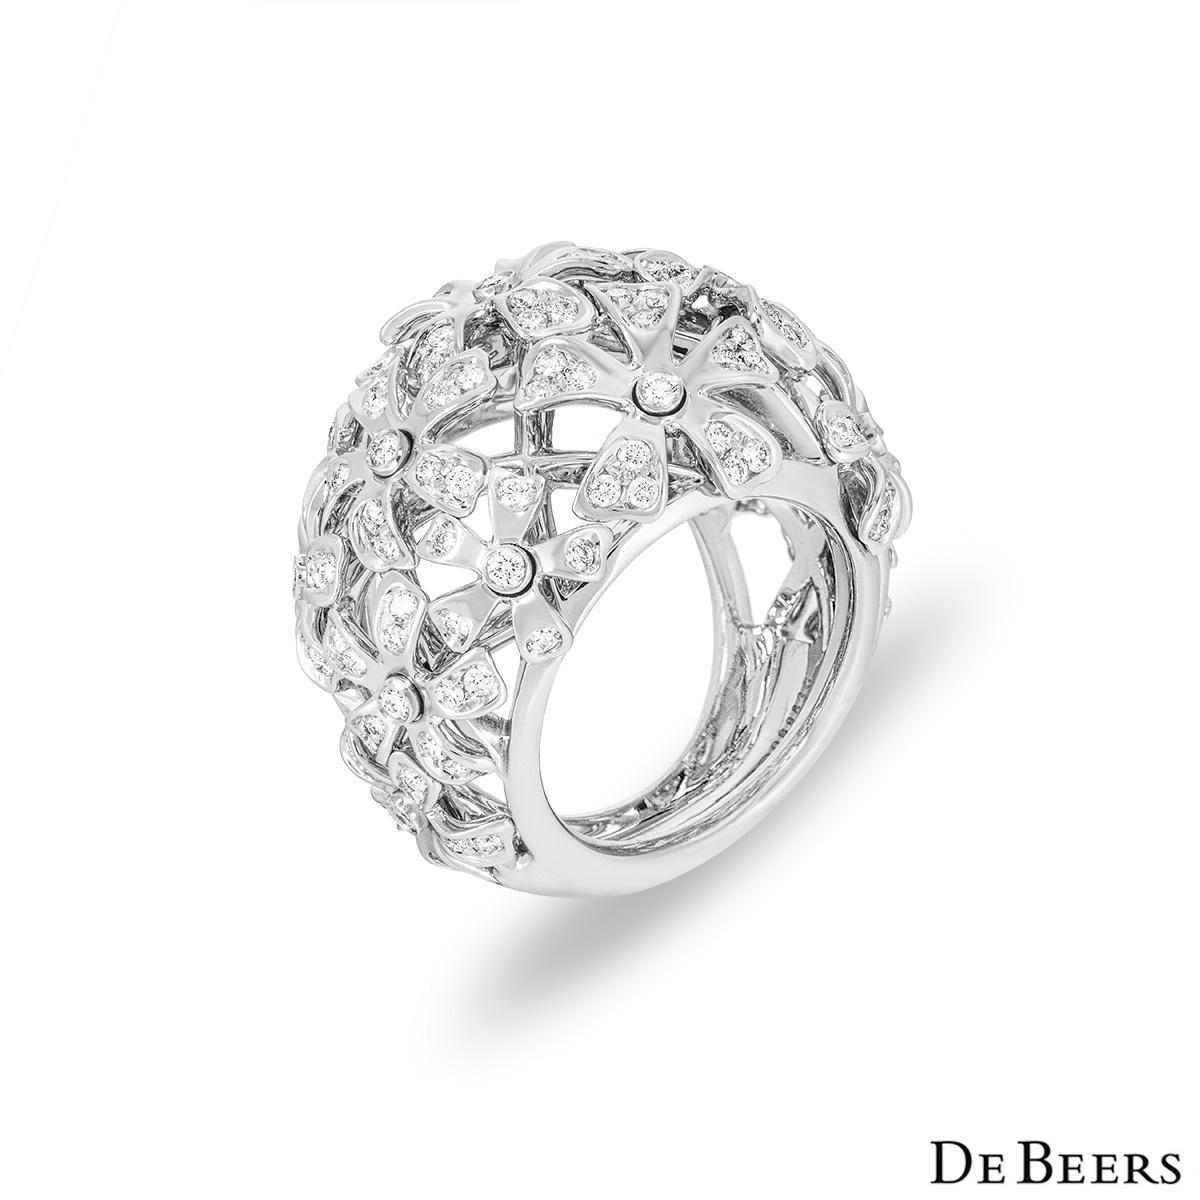 A unique 18k white gold diamond dress ring by De Beers. The ring features an openwork flower design set with round brilliant cut diamonds. The ring sits at 9mm above the finger and measures 2.6cm in width. The ring is a size UK size K/ EU size 50/